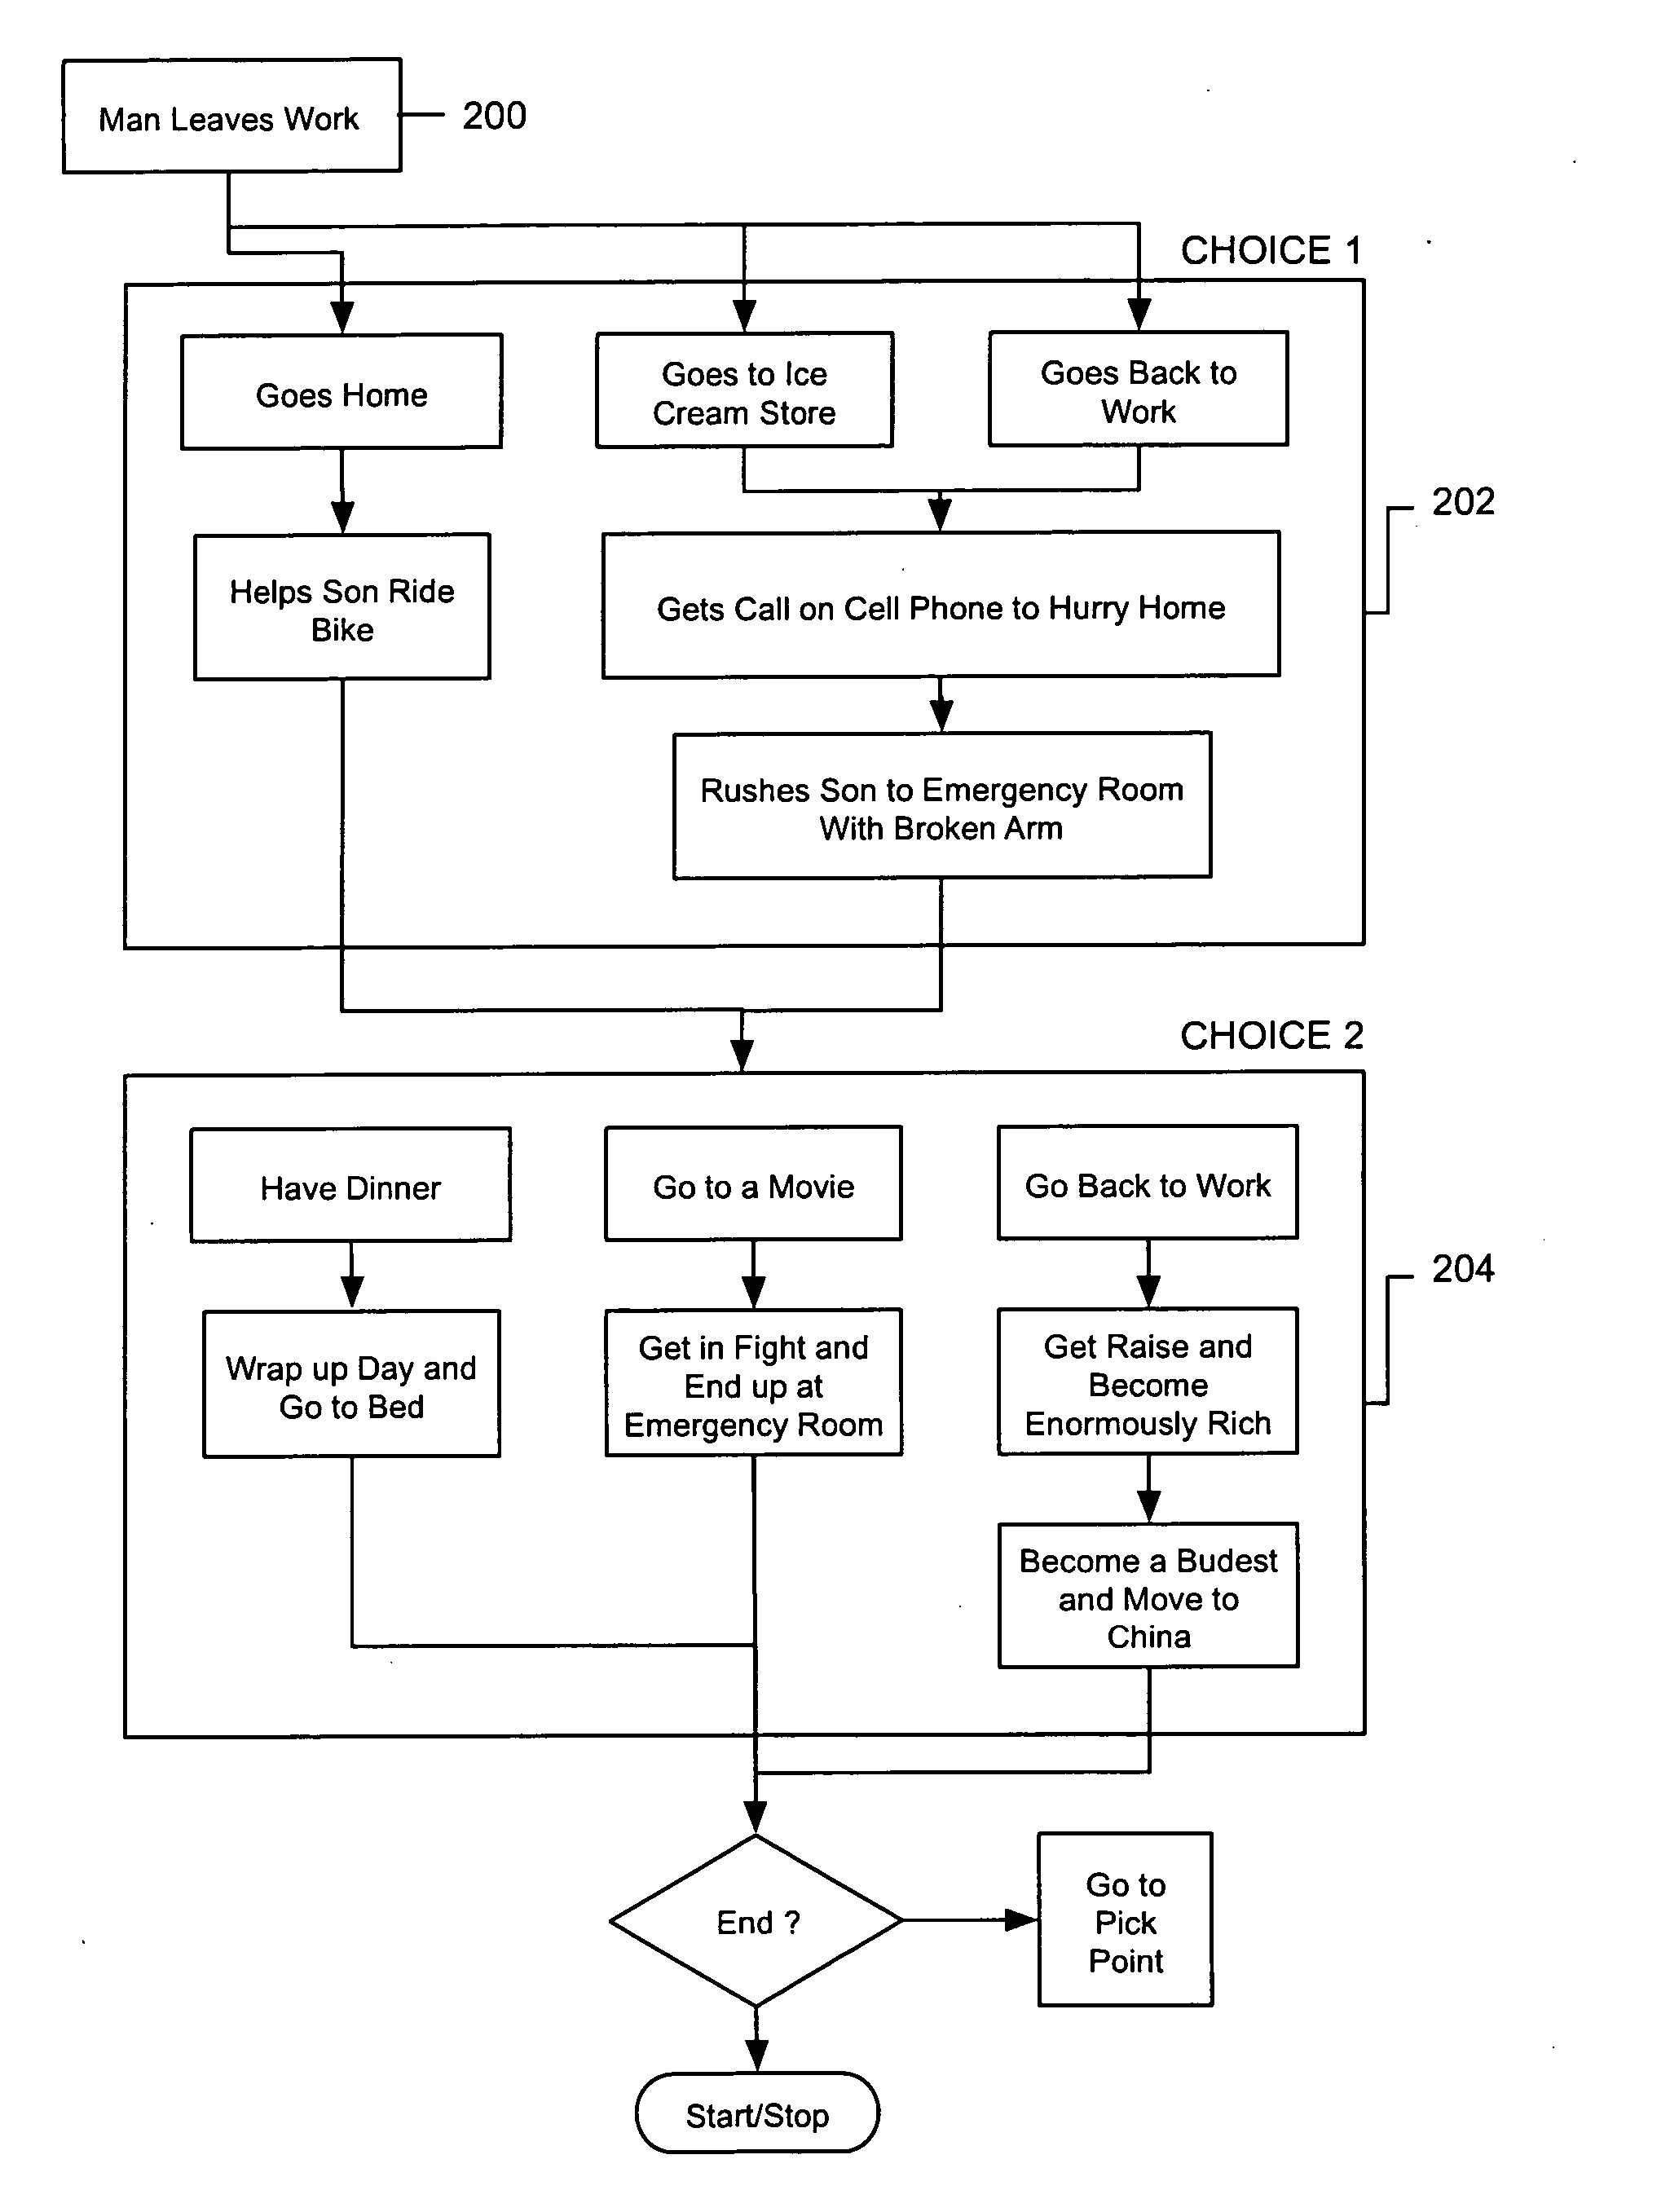 System and method for implementing an interactive storyline